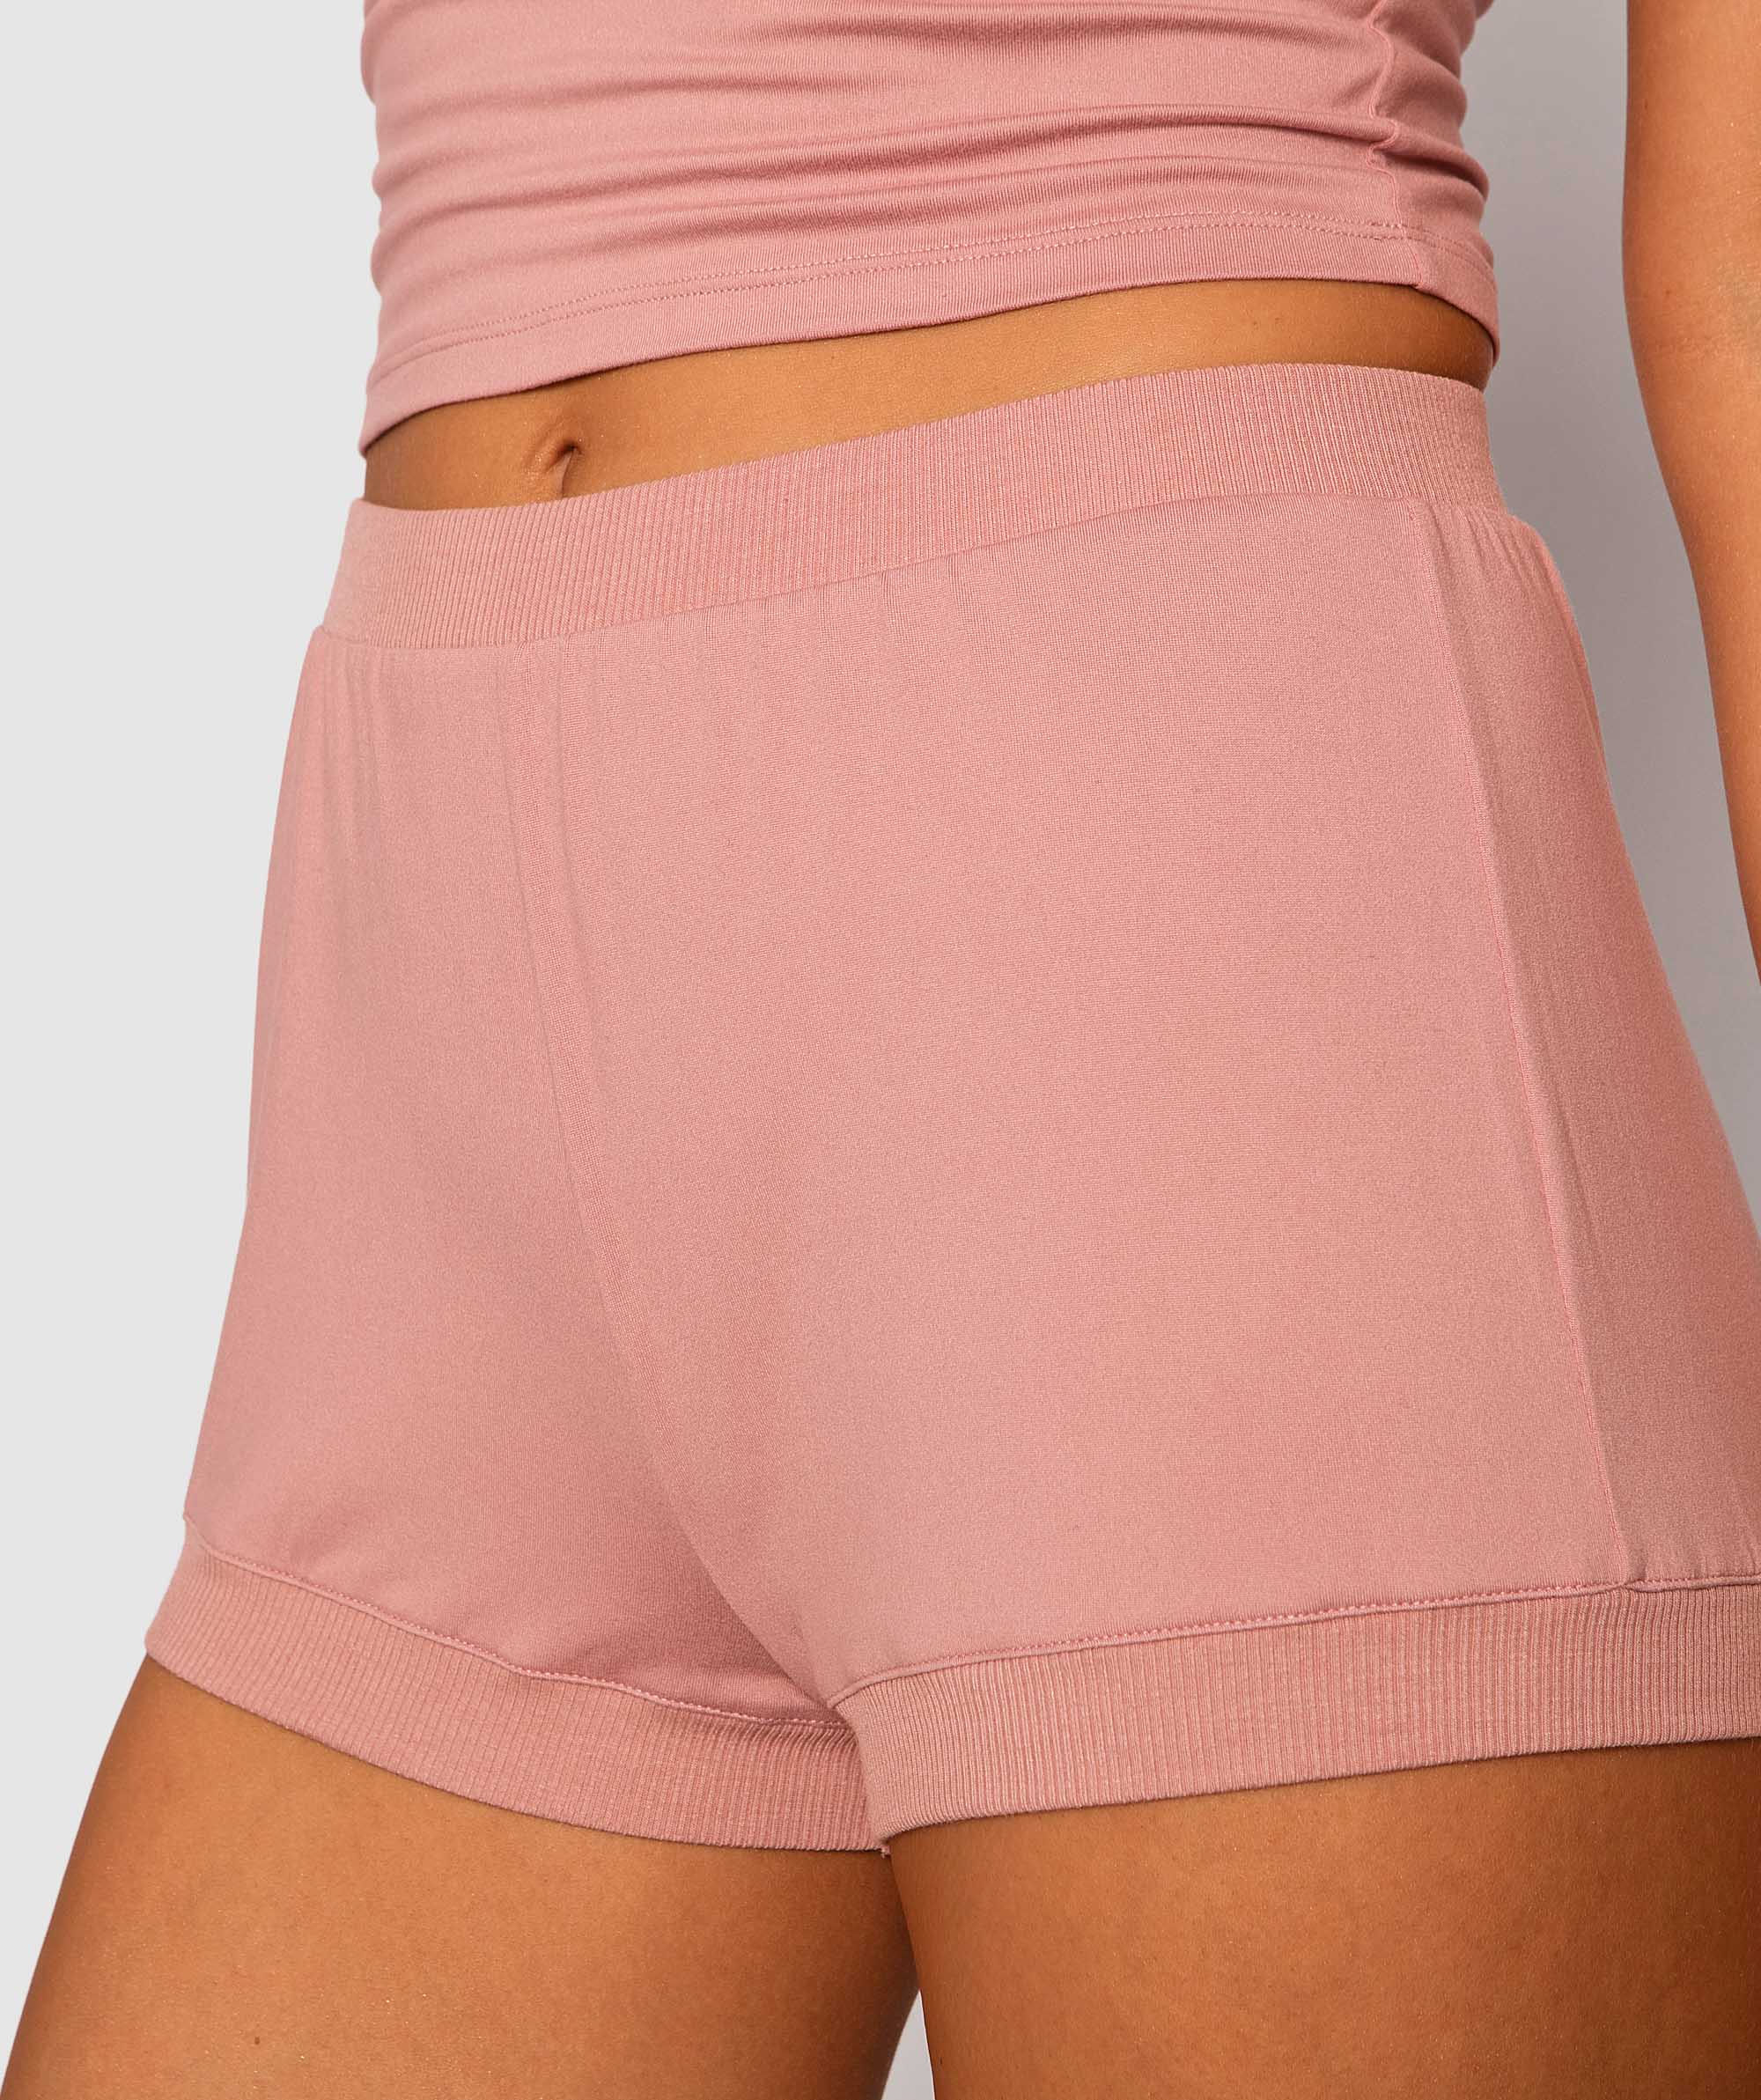 Style By Day Cheeky Shorts - Pink